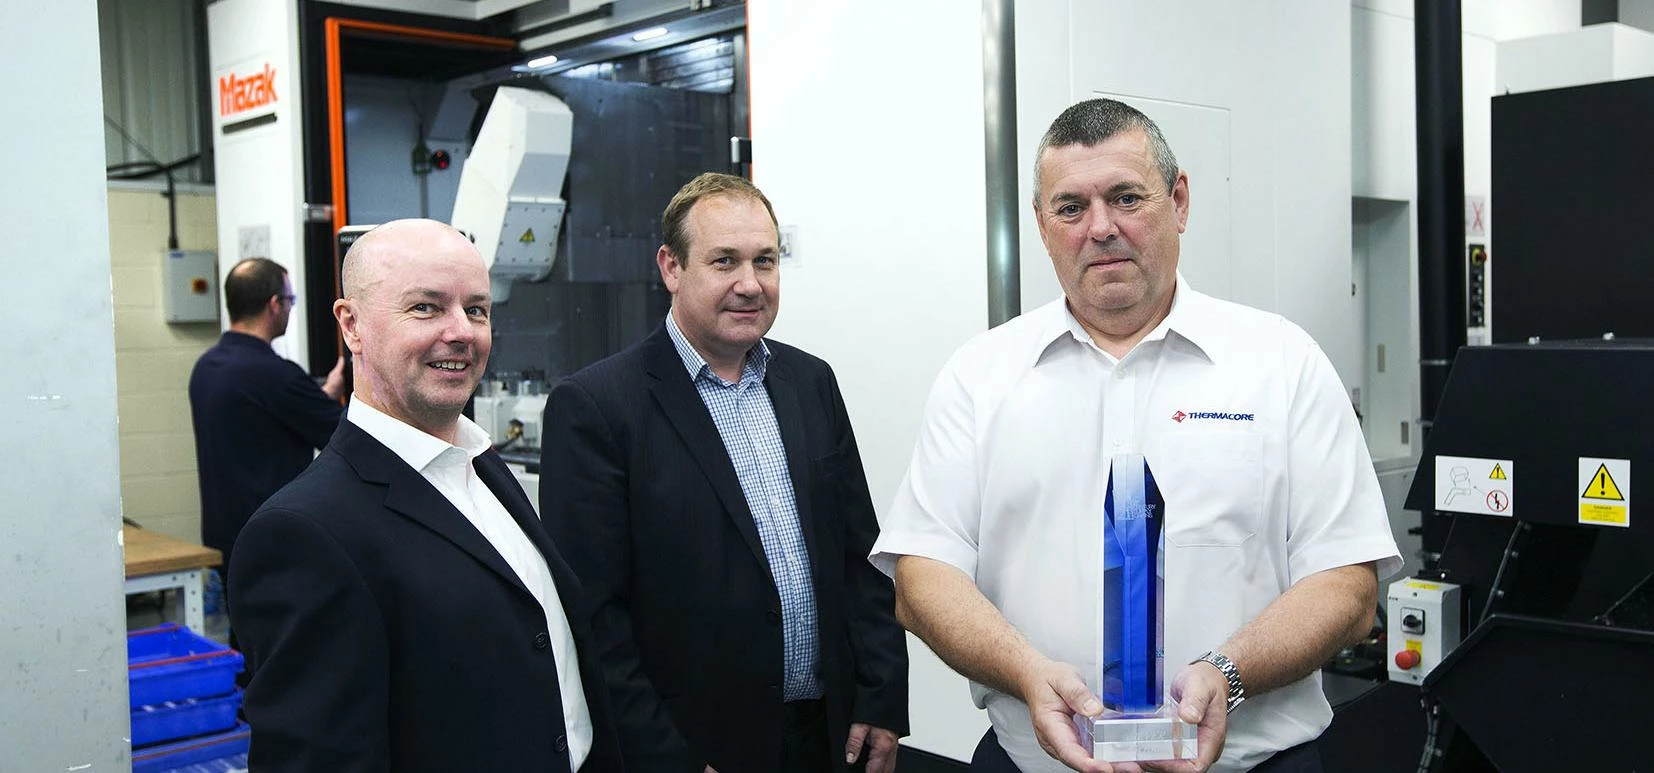 SC21 success: (l-r) Jim Barr, Alan Whittaker (both Business Growth Service) and Mark Robinson (Therm